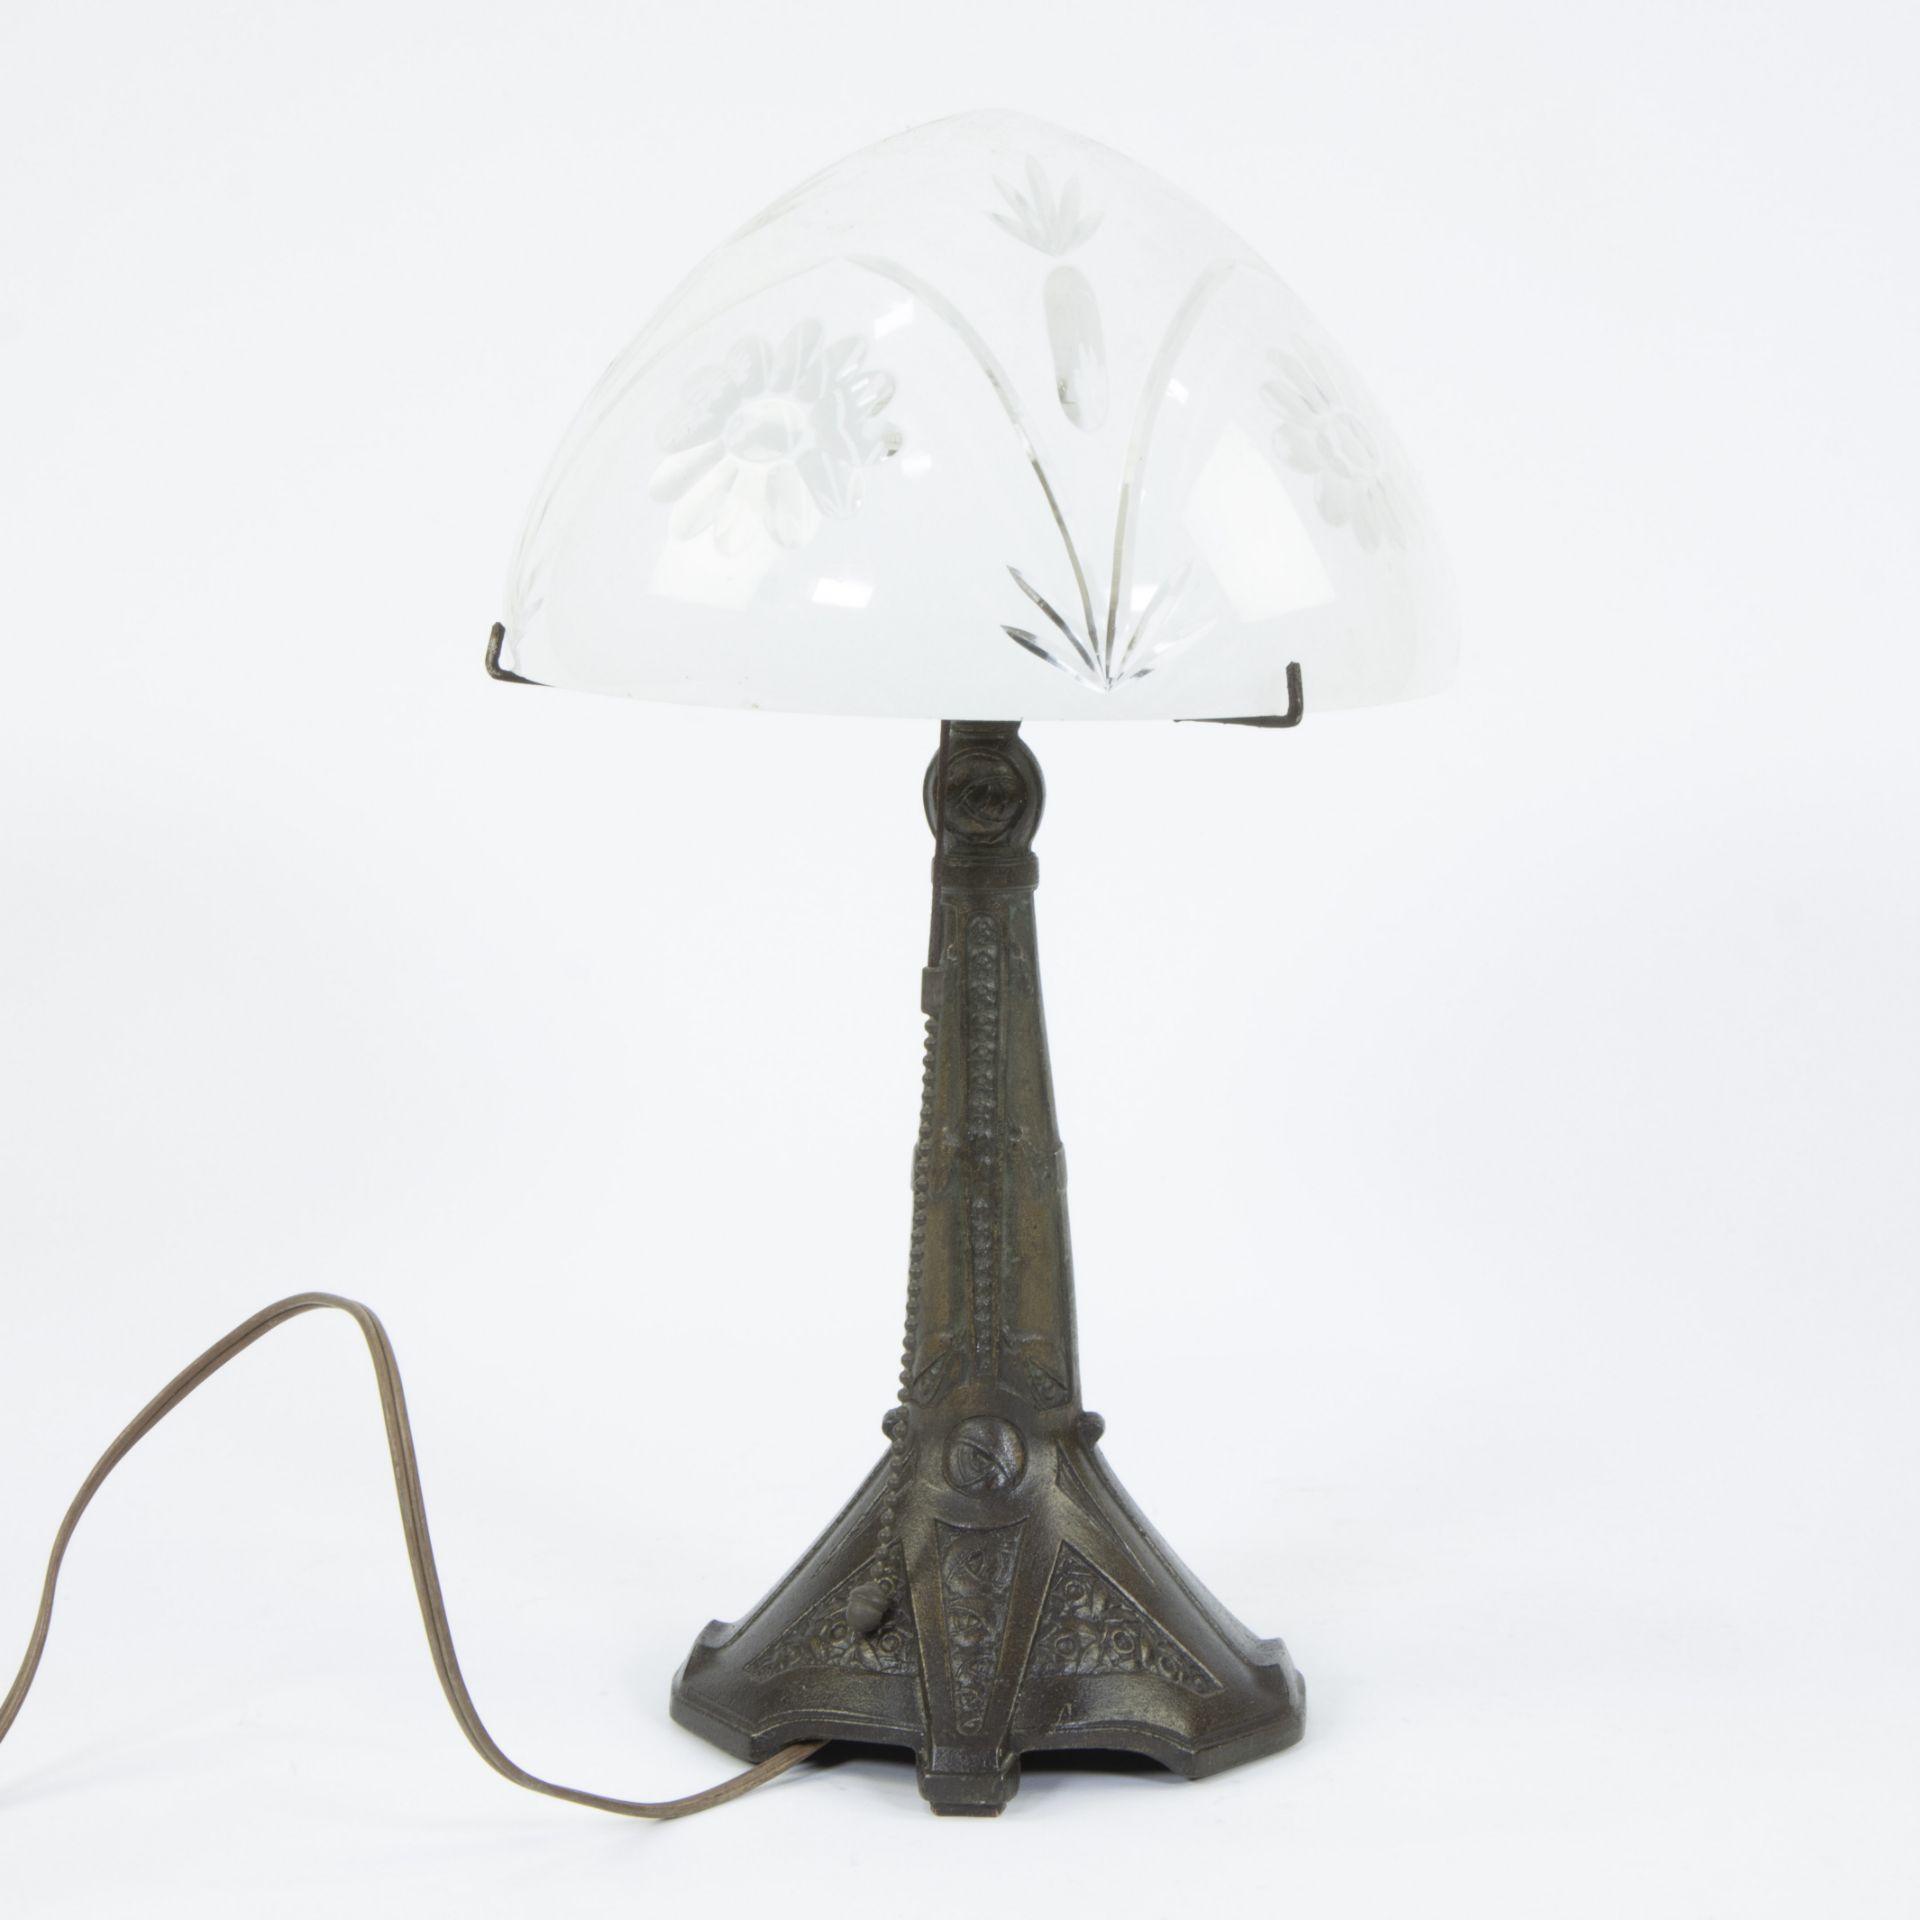 Art Deco mushroom lamp with bronze base and glass shade - Image 2 of 4